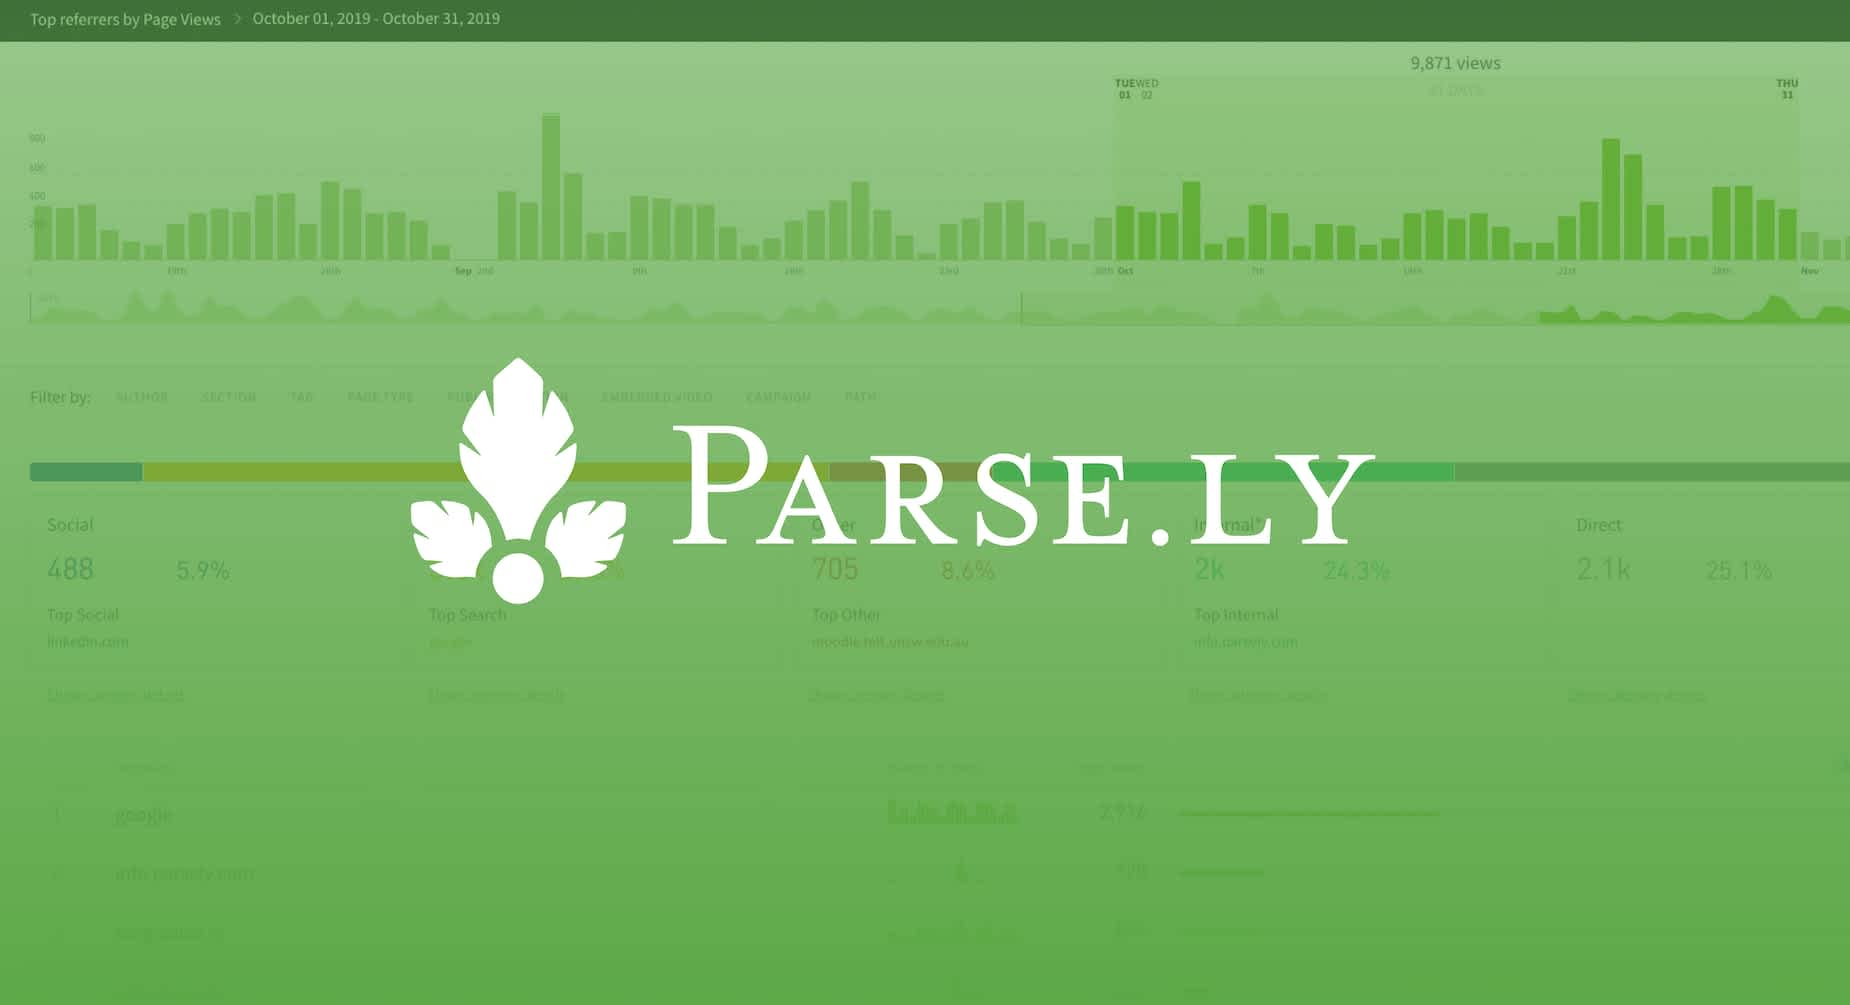 Parse.ly logo over a green background